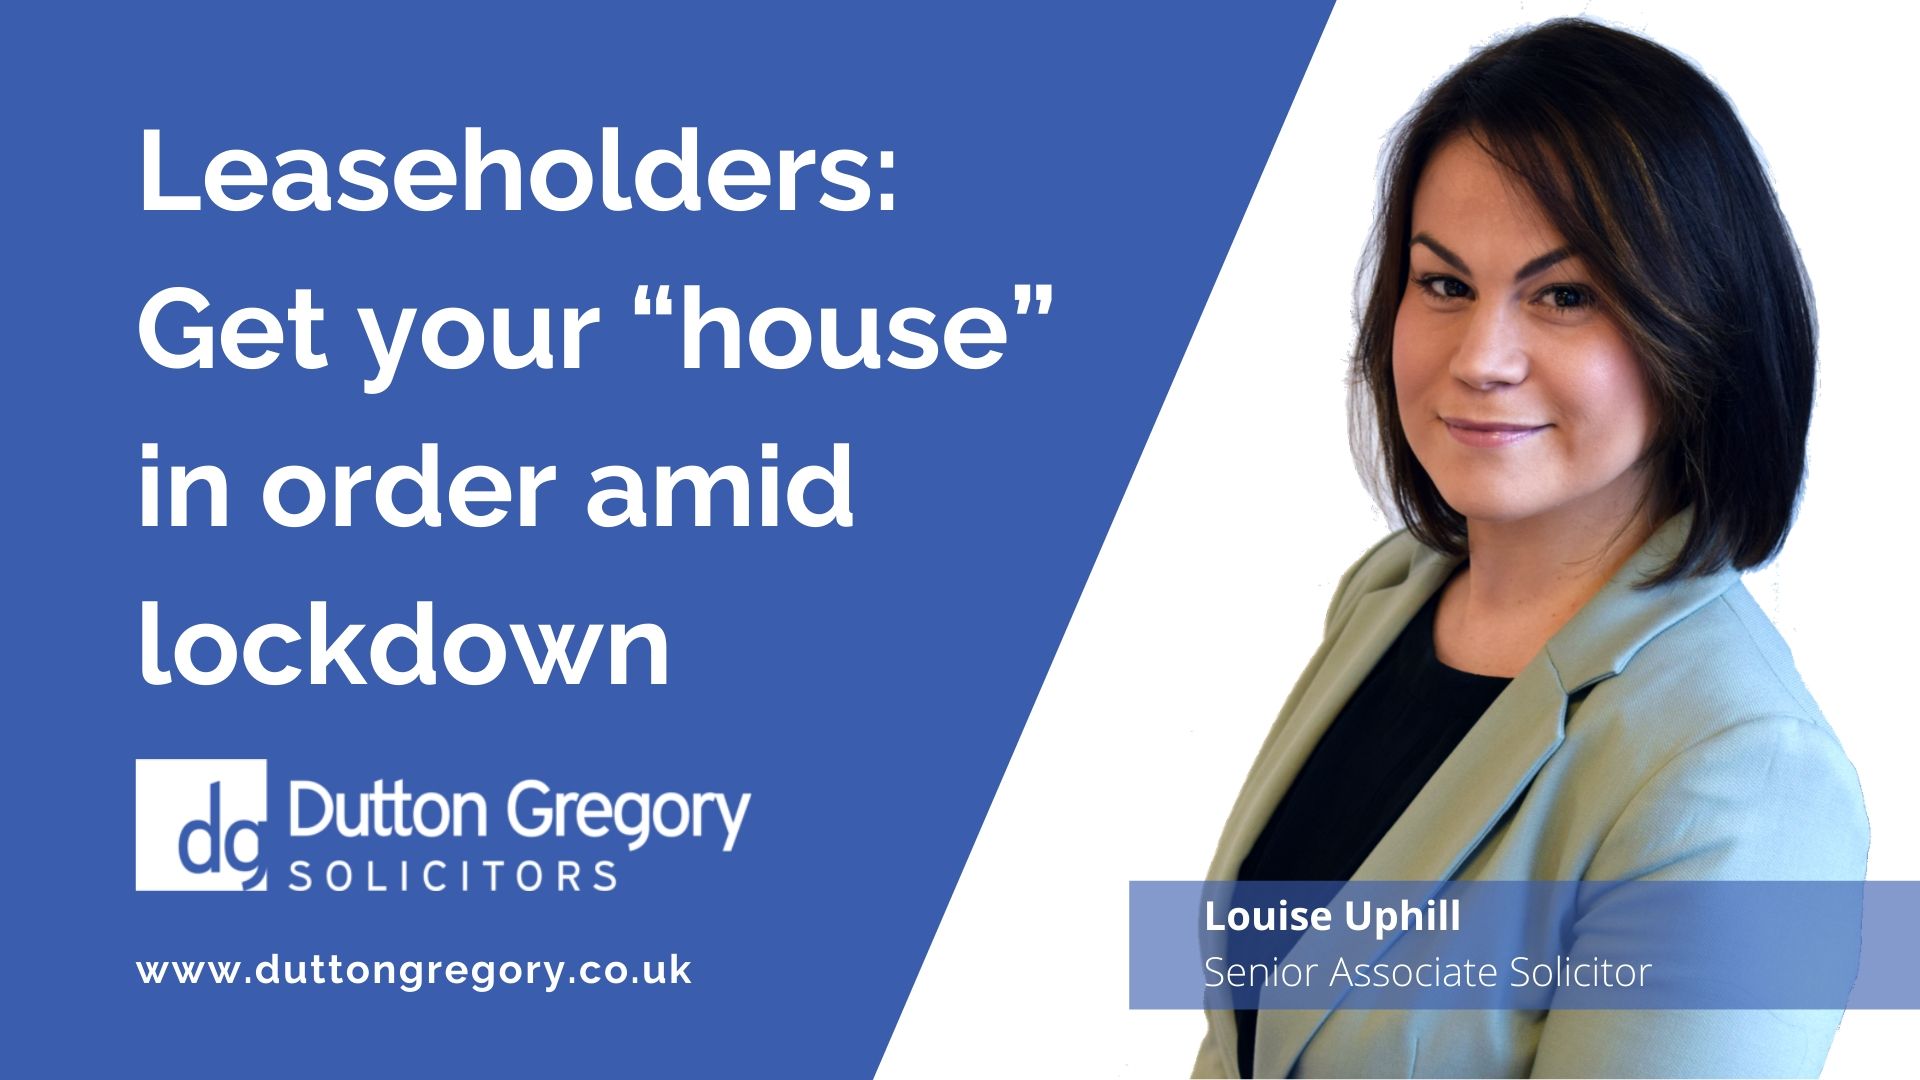 Leaseholders: get your "house" in order amid lockdown